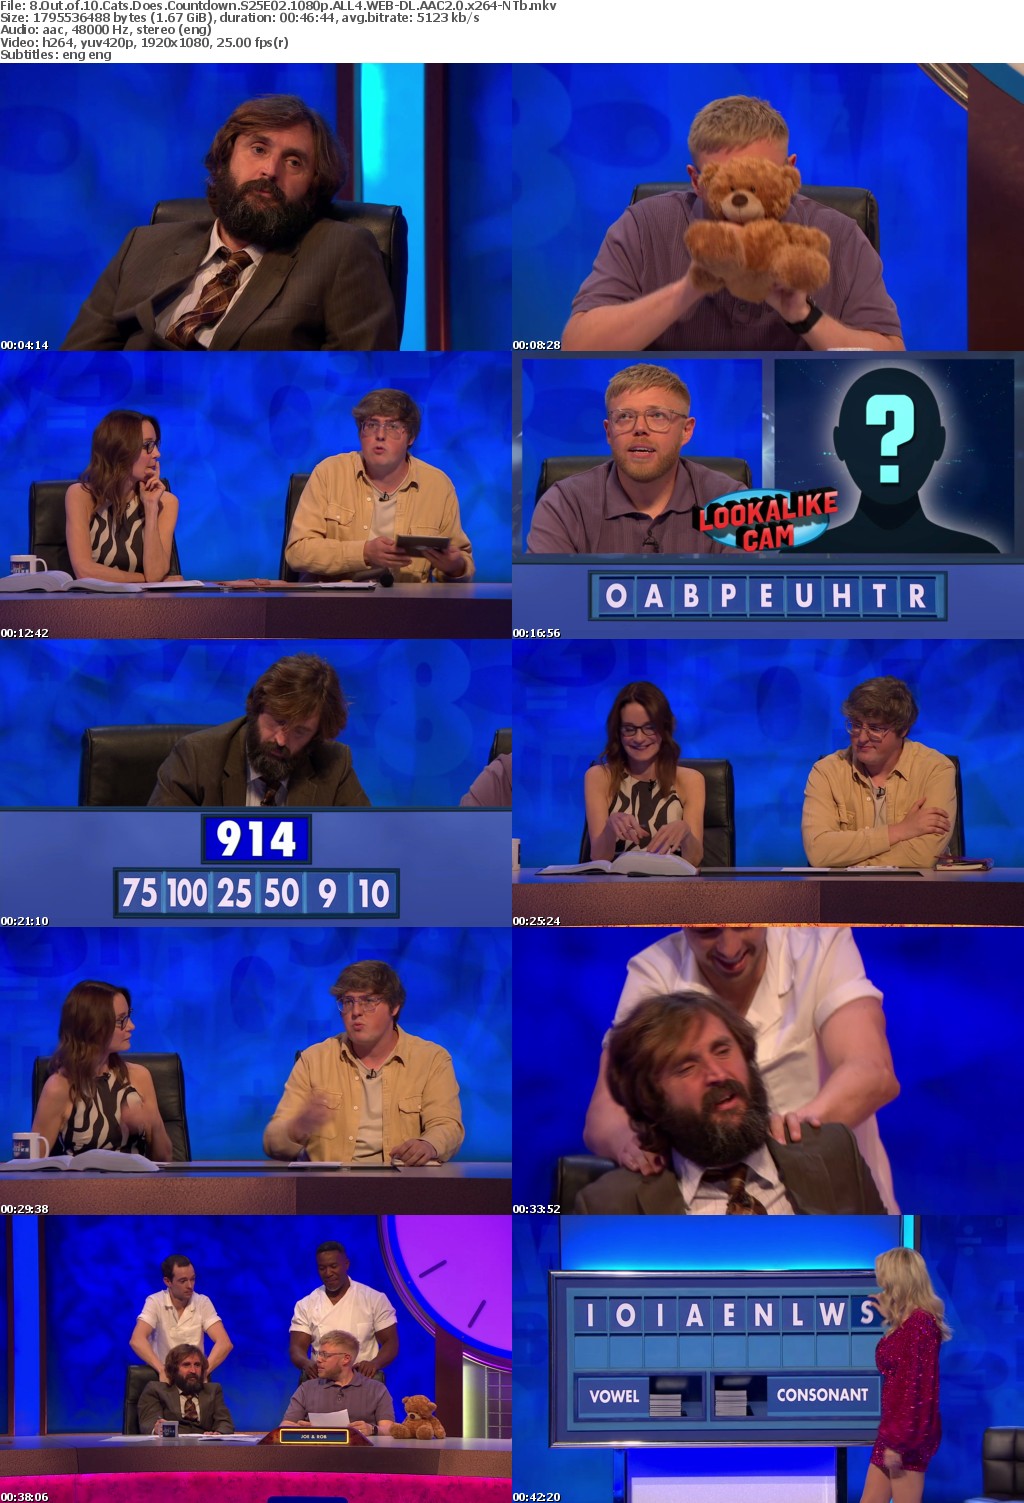 8 Out of 10 Cats Does Countdown S25E02 1080p ALL4 WEB-DL AAC2 0 x264-NTb